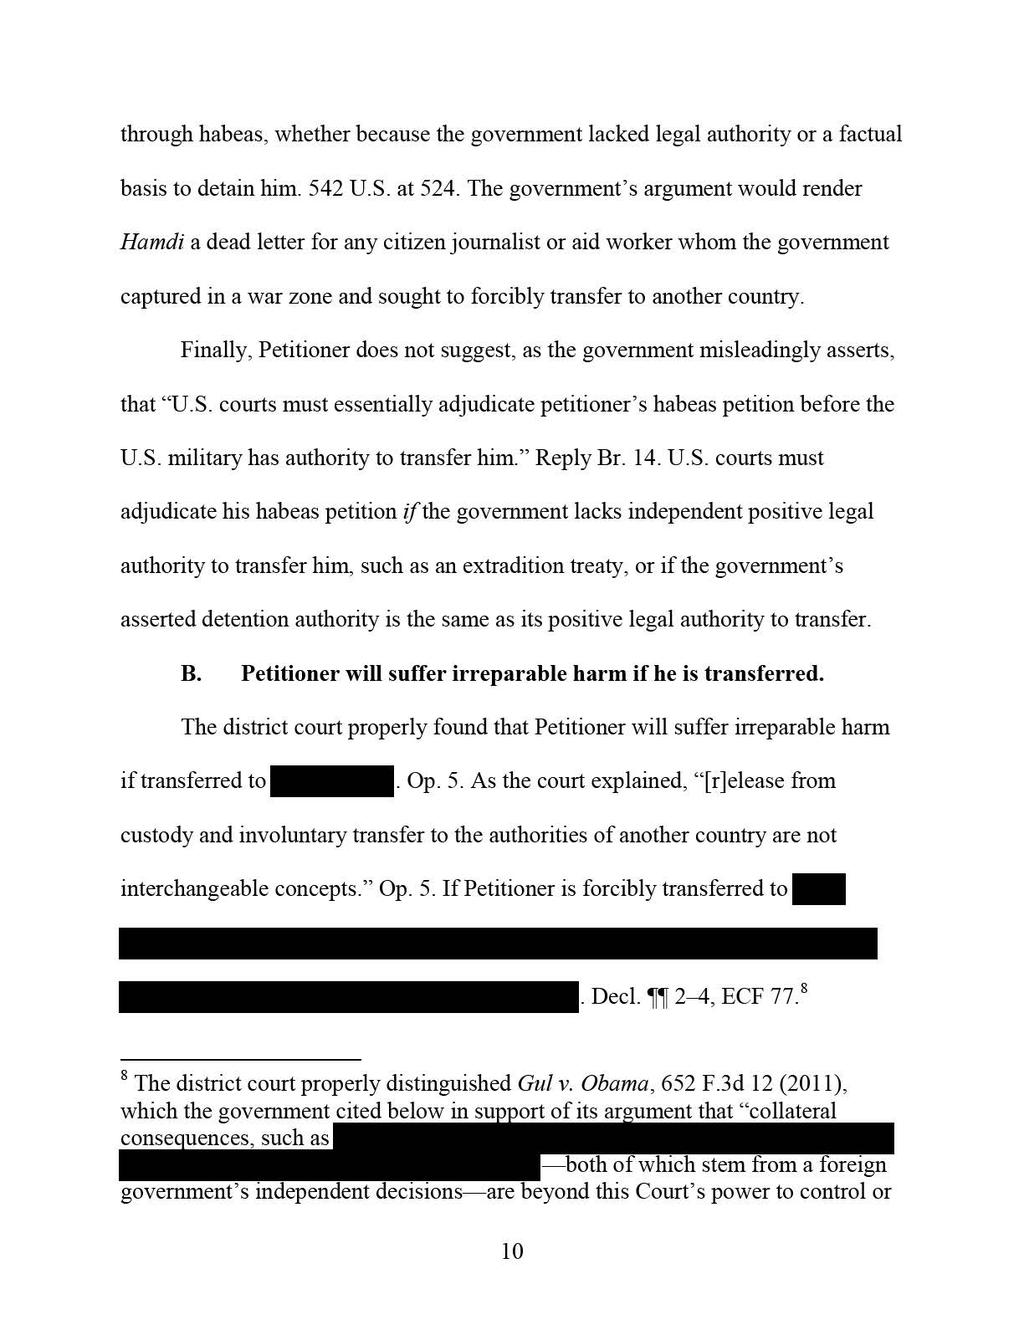 USCA Case #18-5110 Document #1727984 Filed: 04/24/2018 Page 18 of 26 MATERIAL UNDER SEAL DELETED through habeas, whether because the government lacked legal authority or a factual basis to detain him.